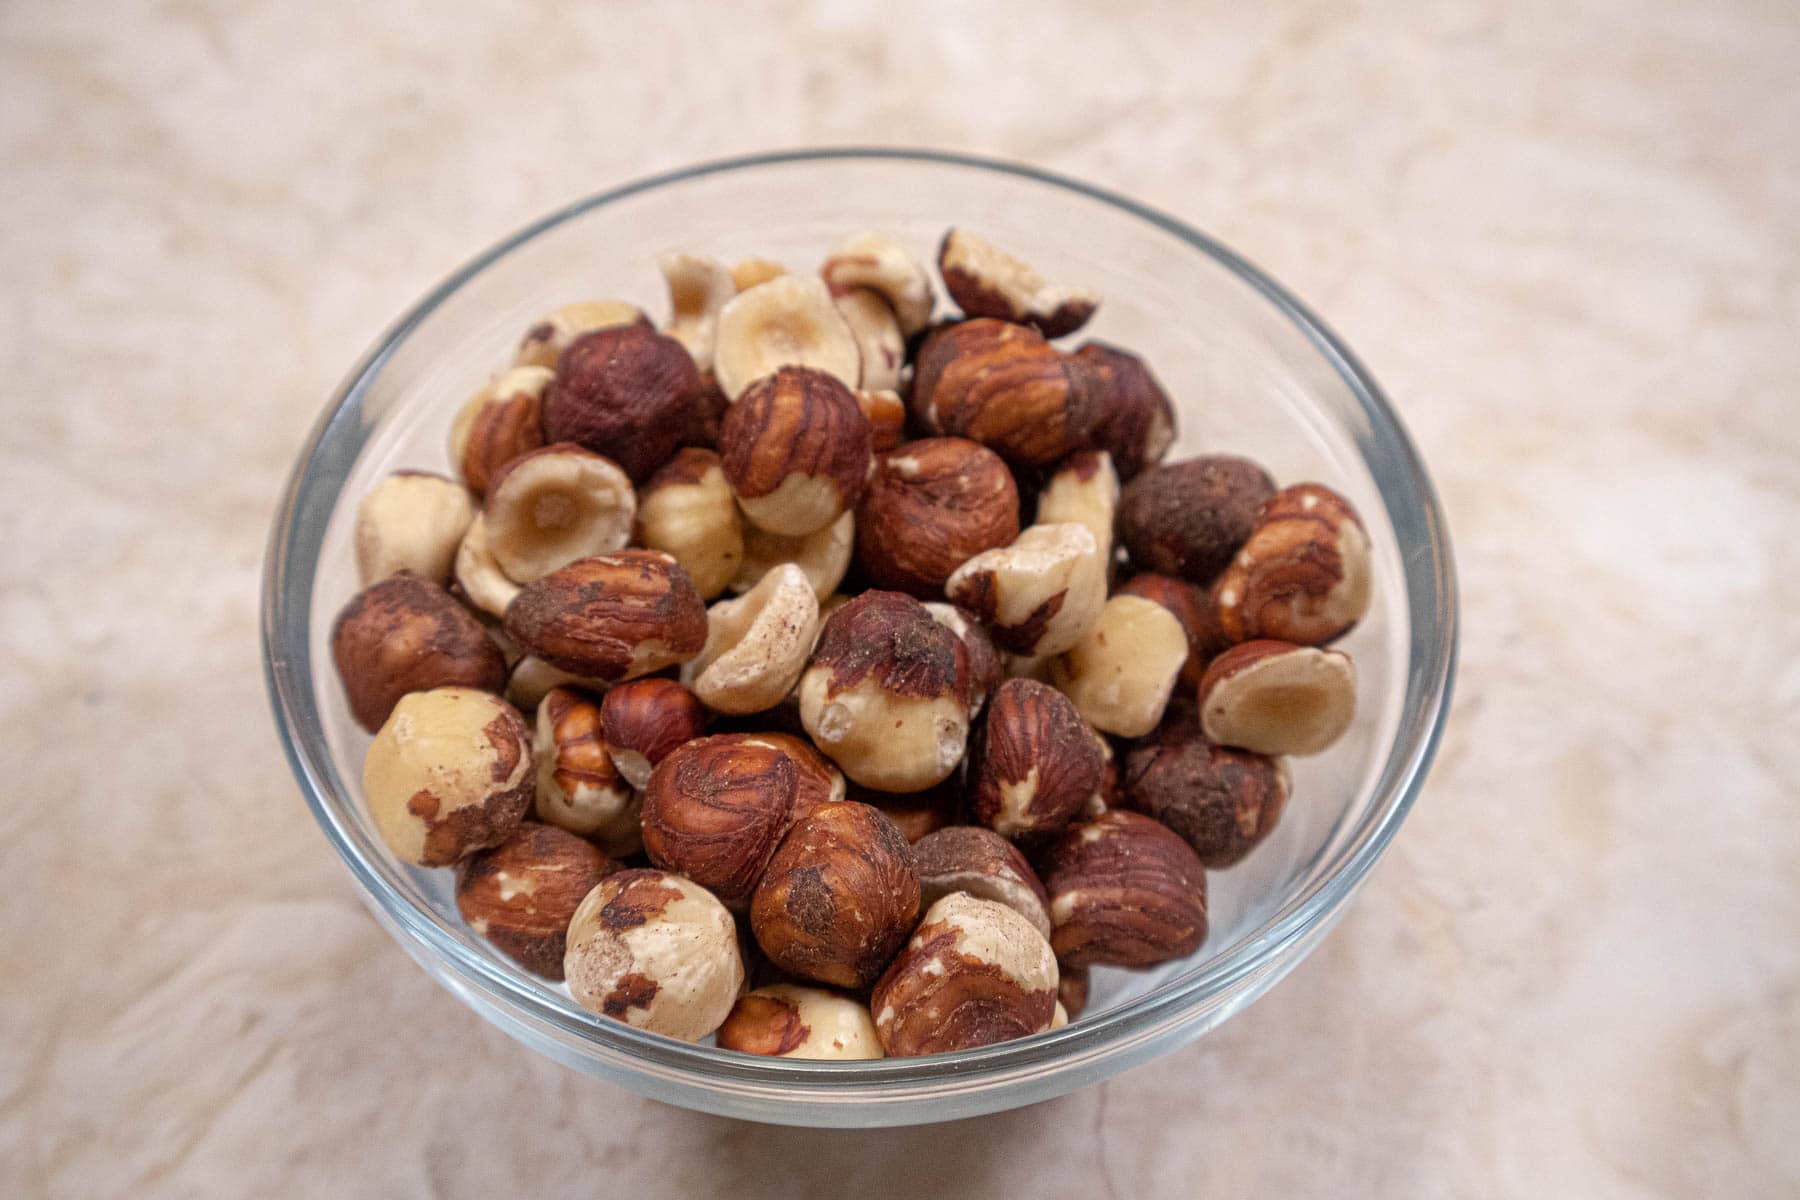 Hazelnuts with skins on to be toasted